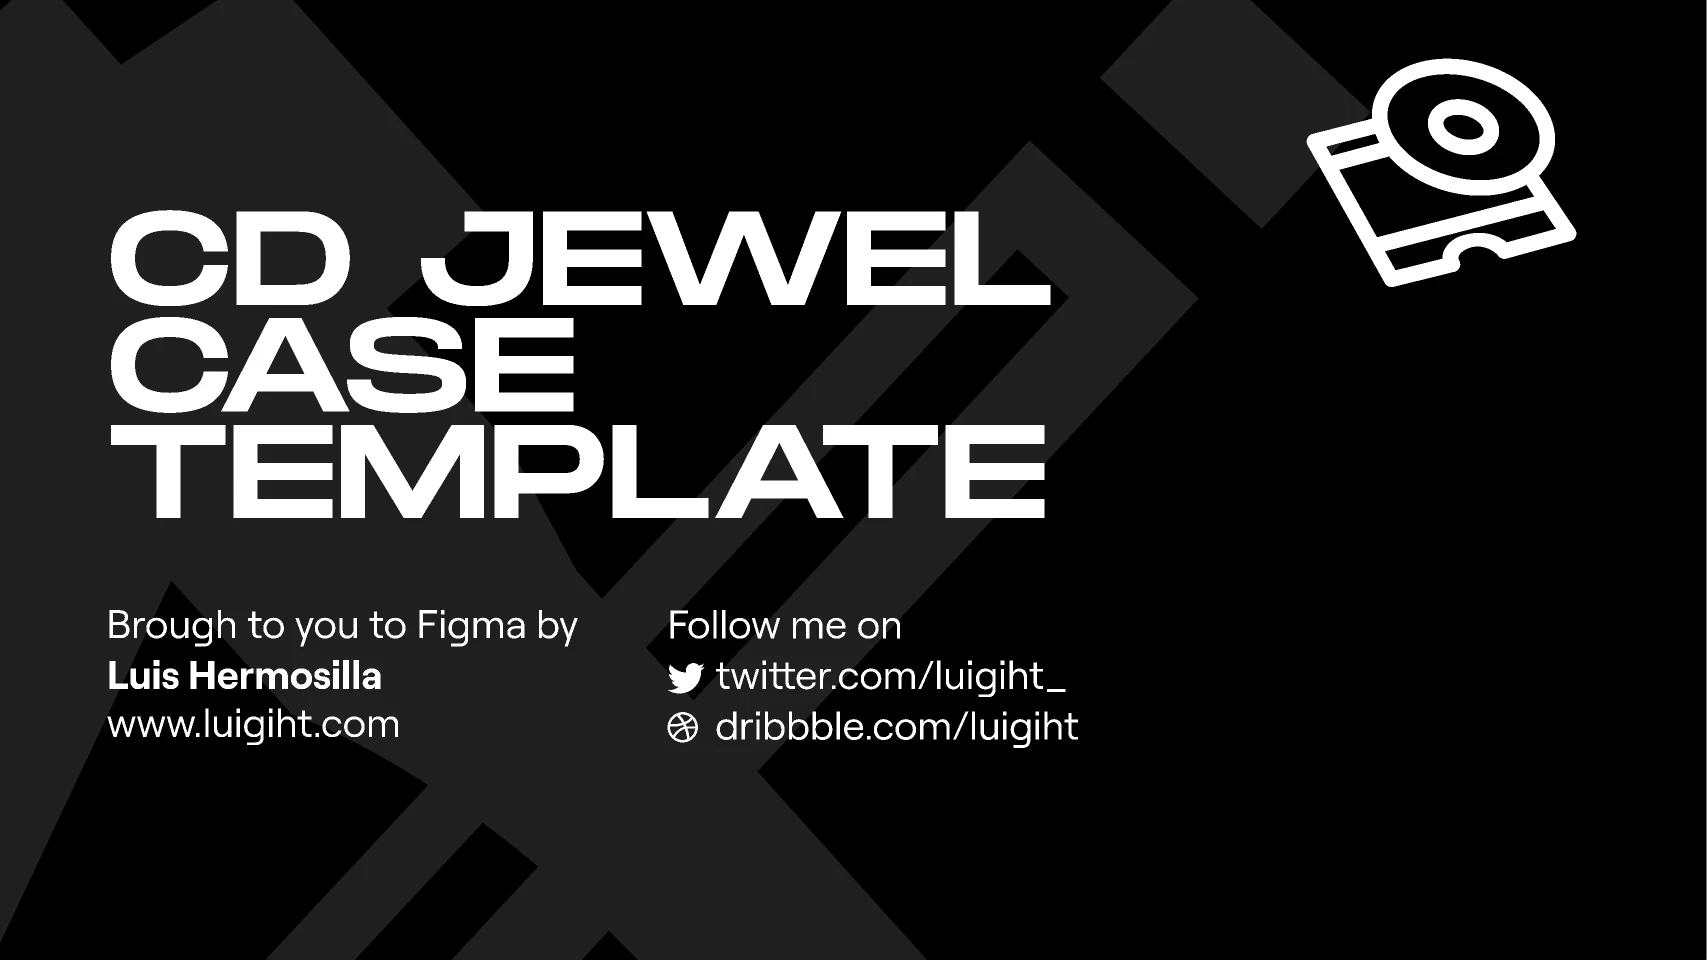 CD Jewel Case Template for Figma and Adobe XD